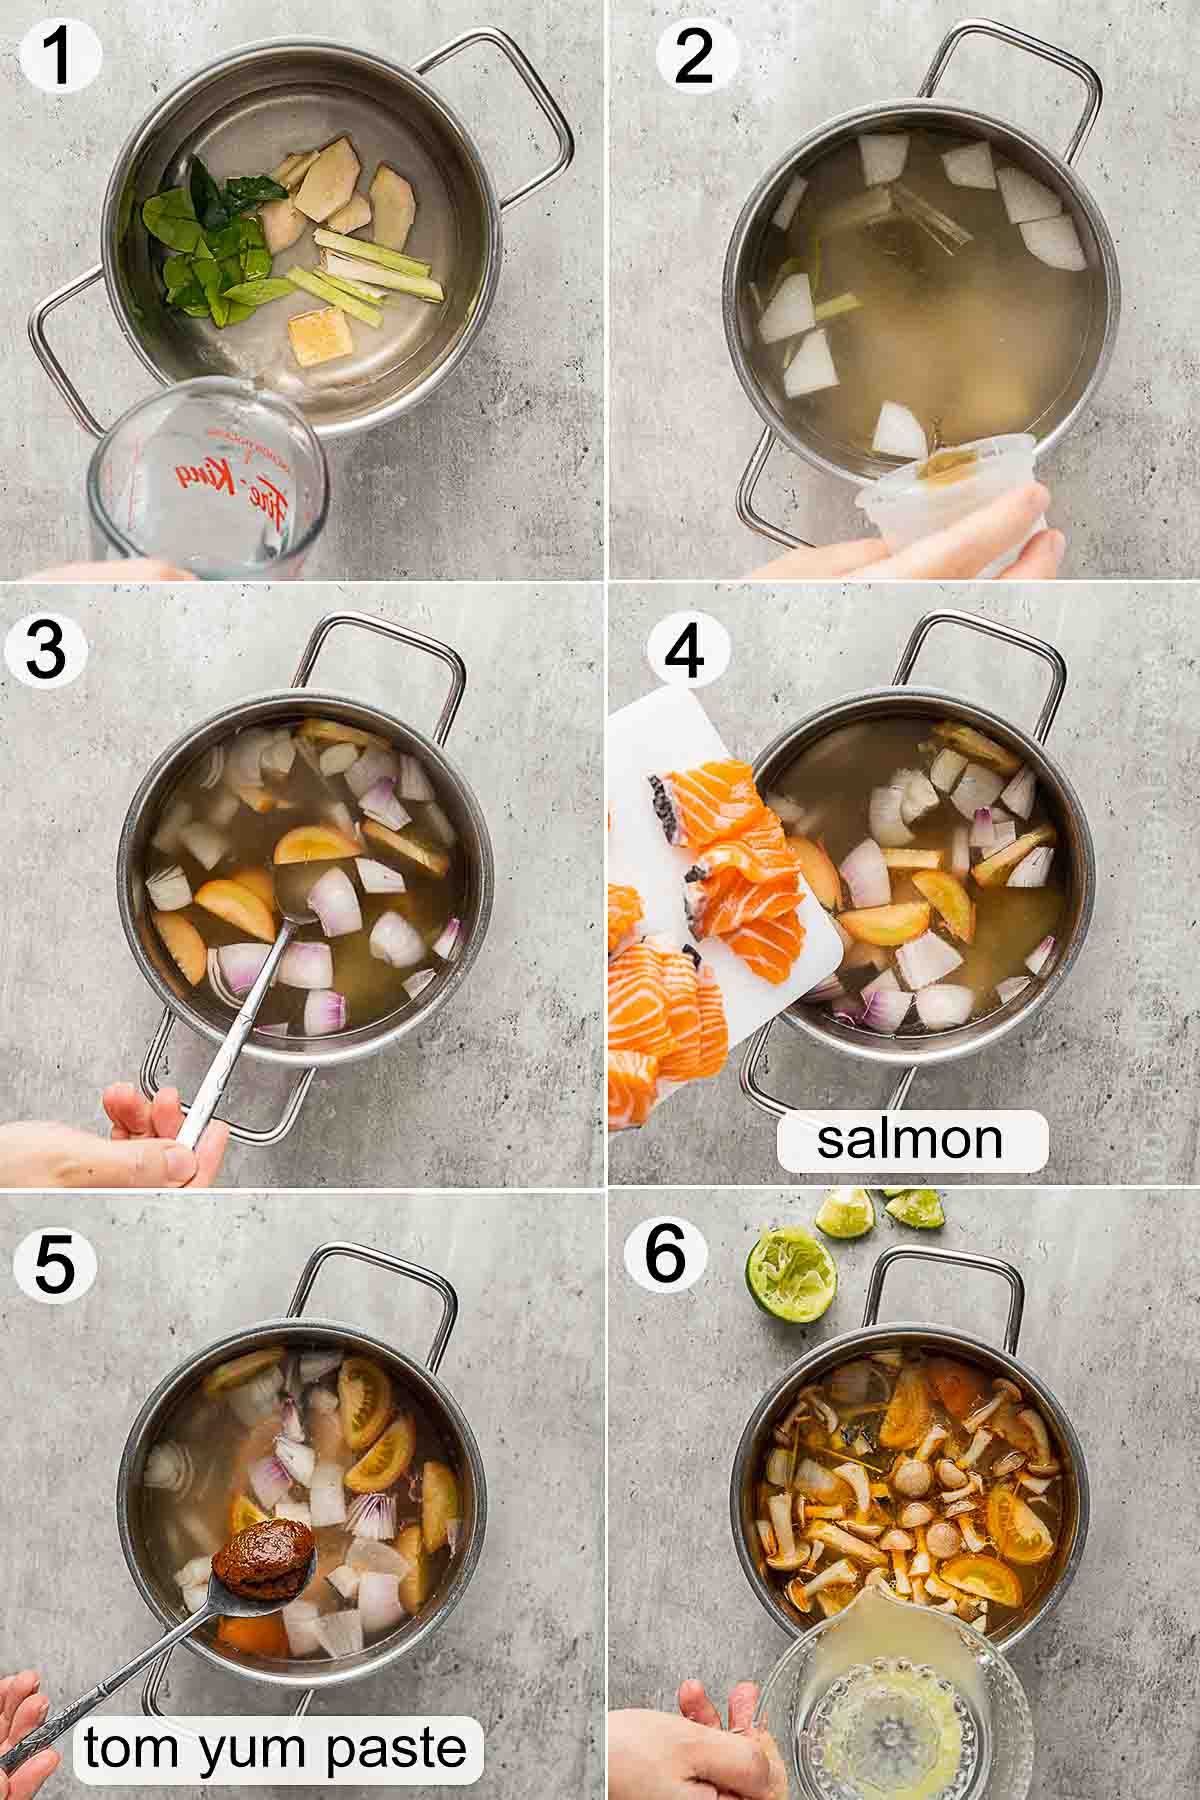 step-by-step process on how to make tom yum soup.